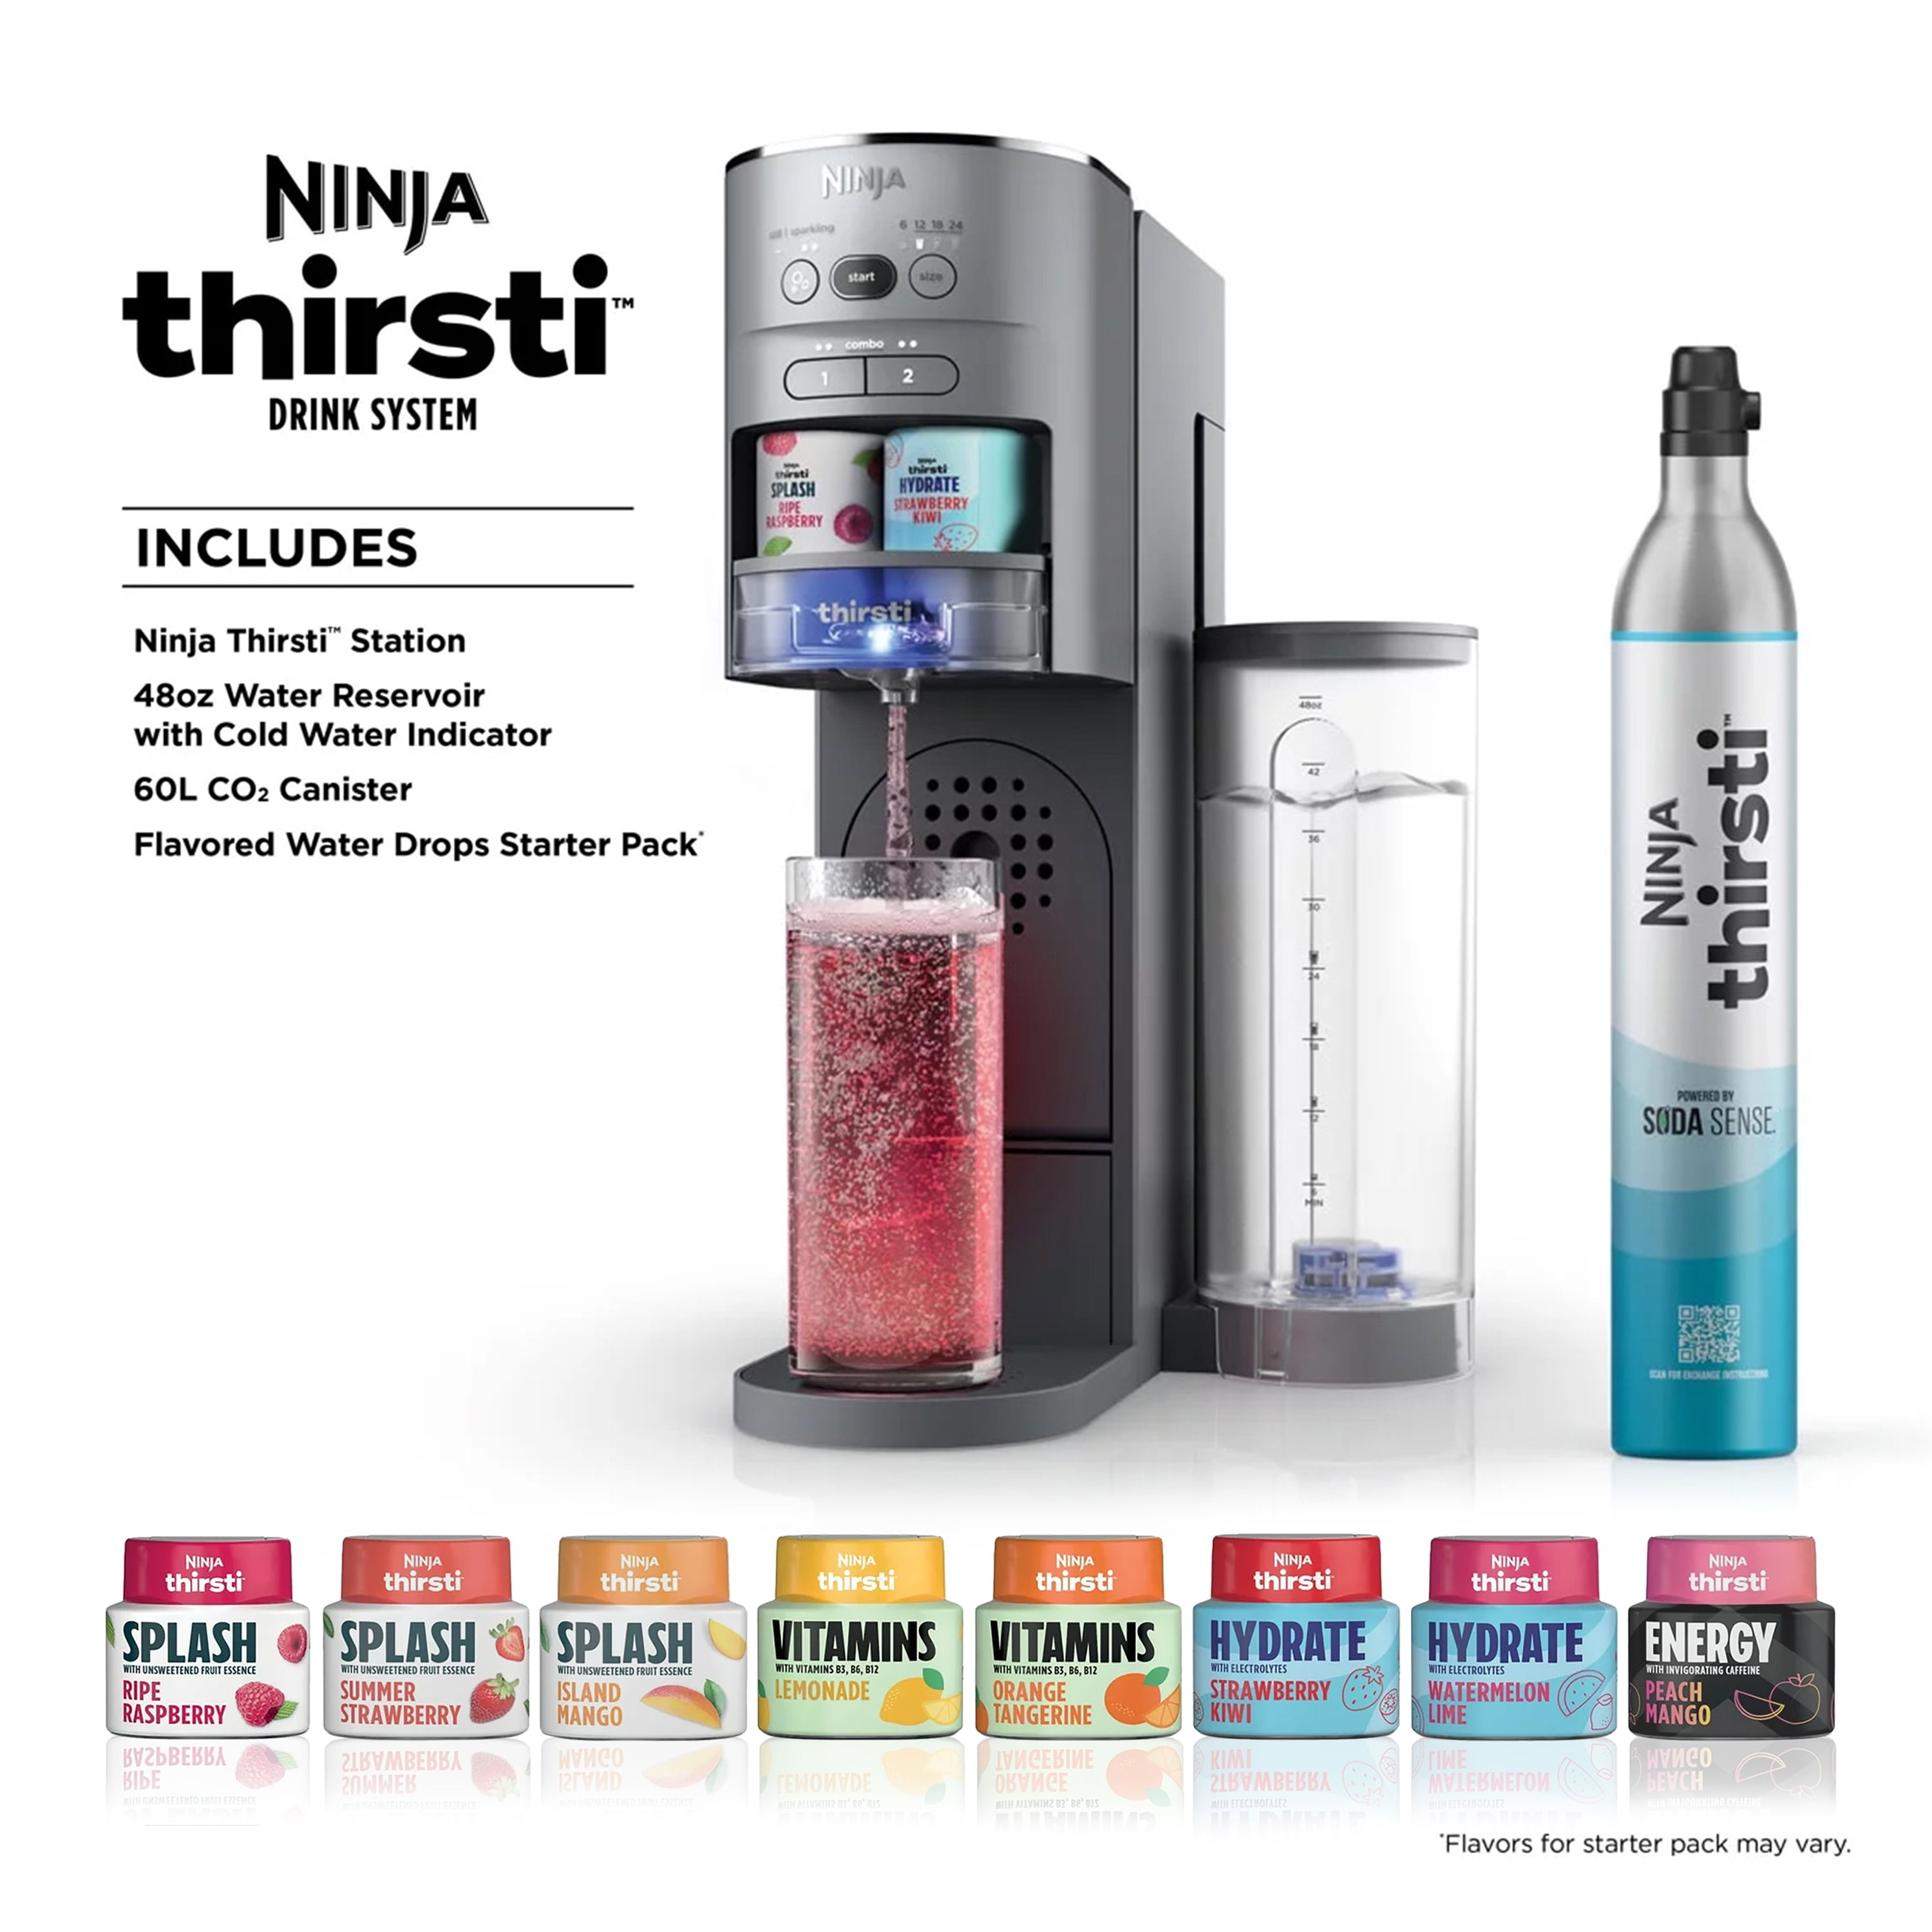 Unboxing & Setup Ninja Thirsti Drink System Do This First Before